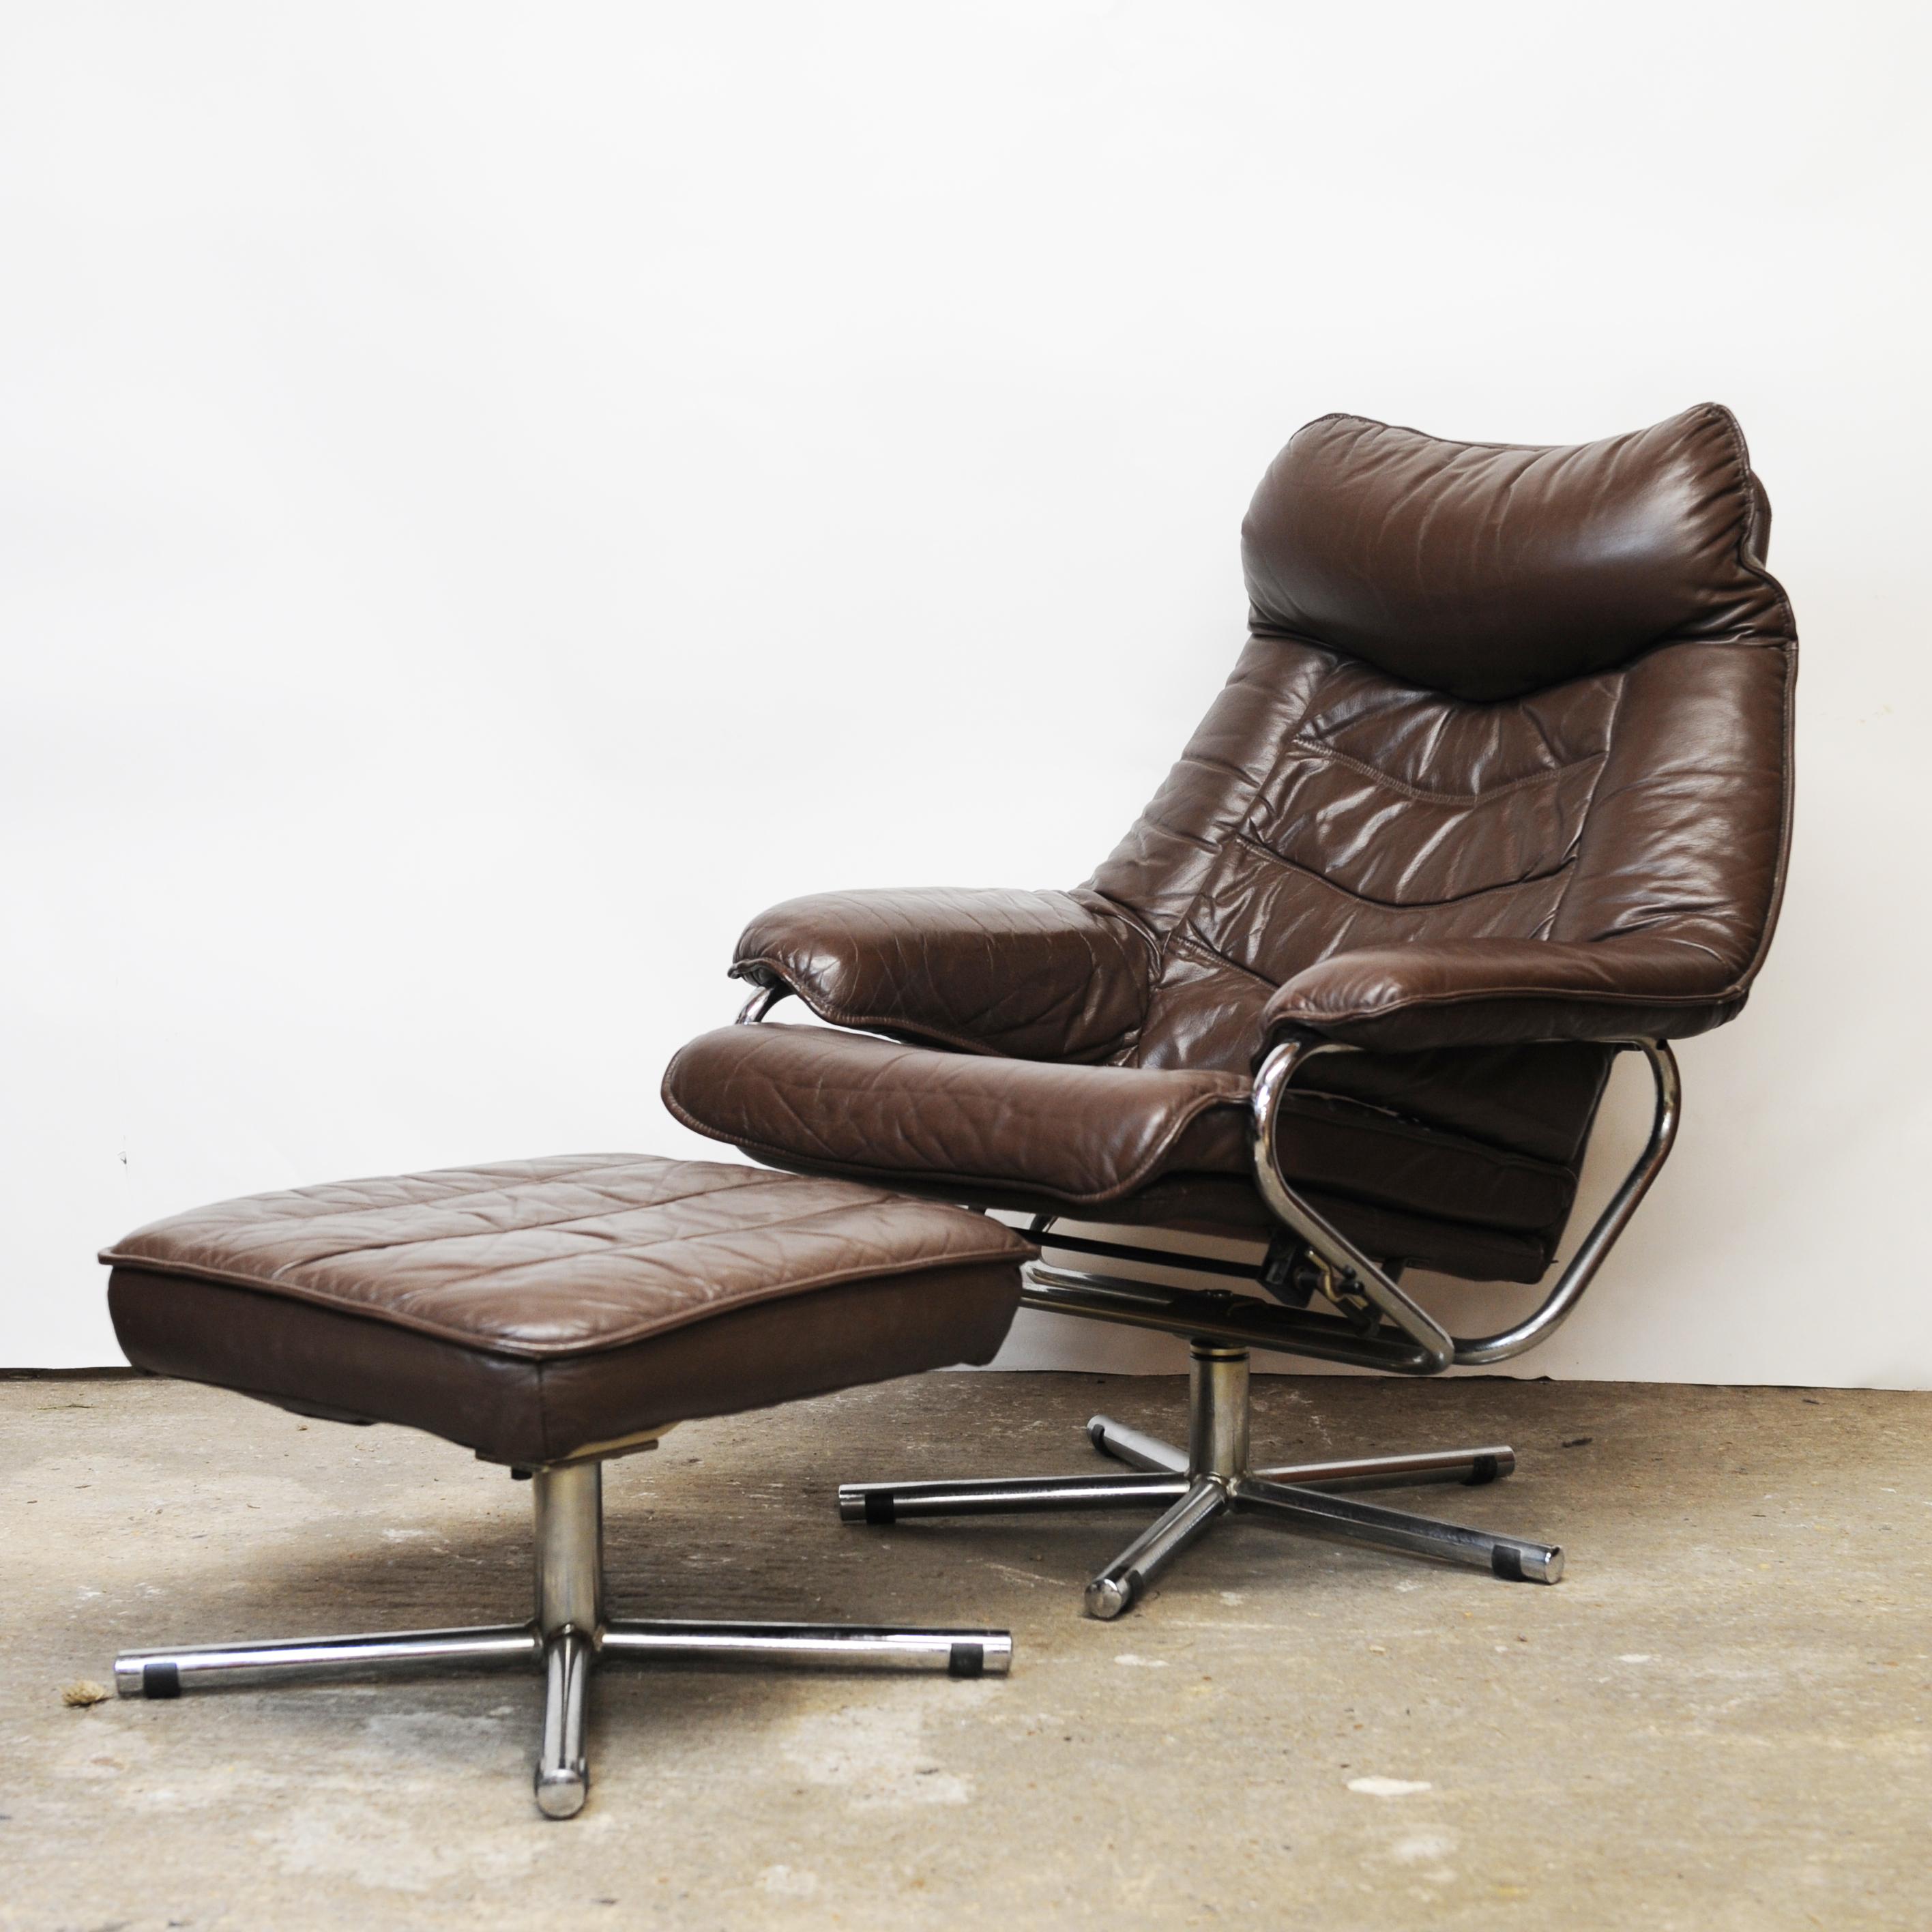 A pair of vintage brown leather lounge chairs with ottomans produced by Skoghaus Industri in Norway. 

Manufacturer - Skoghaus Industri

Design Period - 1970 to 1979

Country of Manufacture - Norway

Style - Mid-Century, Scandinavian

Detailed